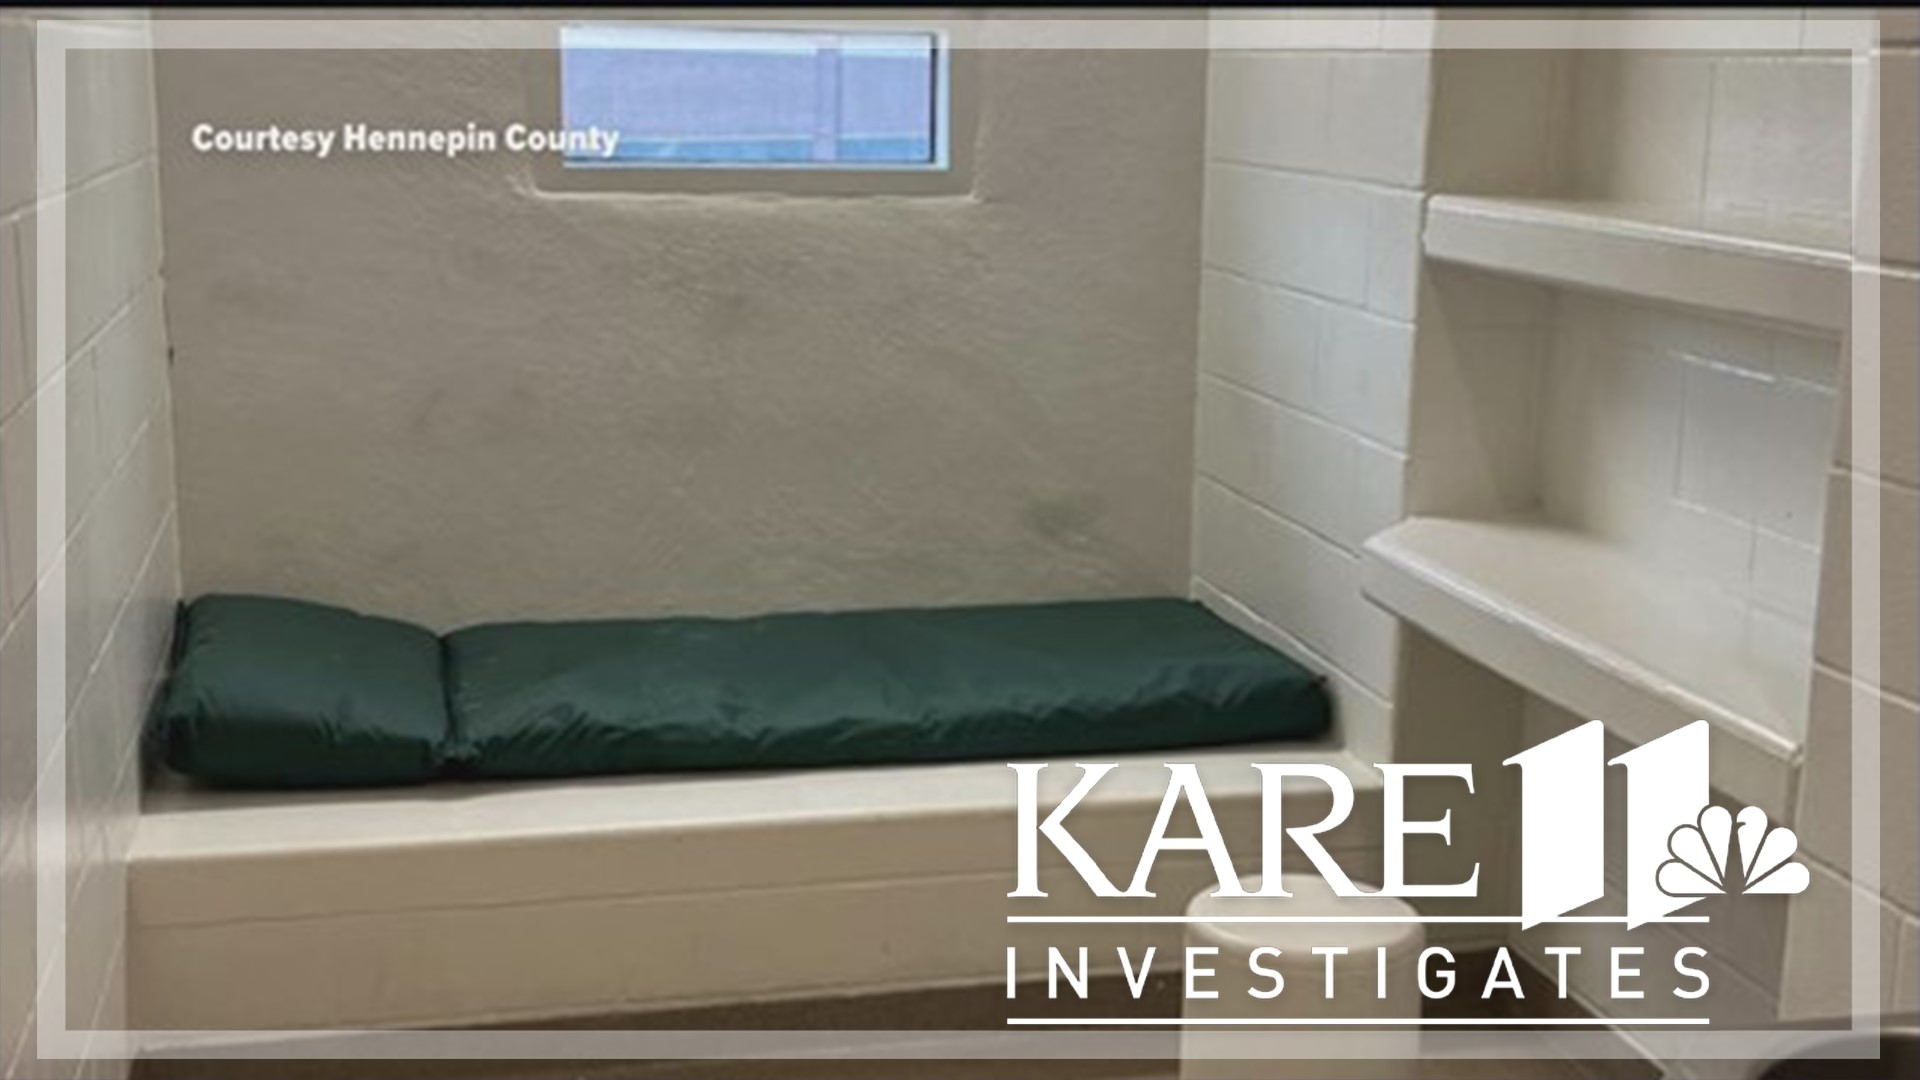 The solitary ban follows KARE 11 reporting showing kids can spend days in the state’s juvenile lockups, putting their mental health and the public’s safety at risk.